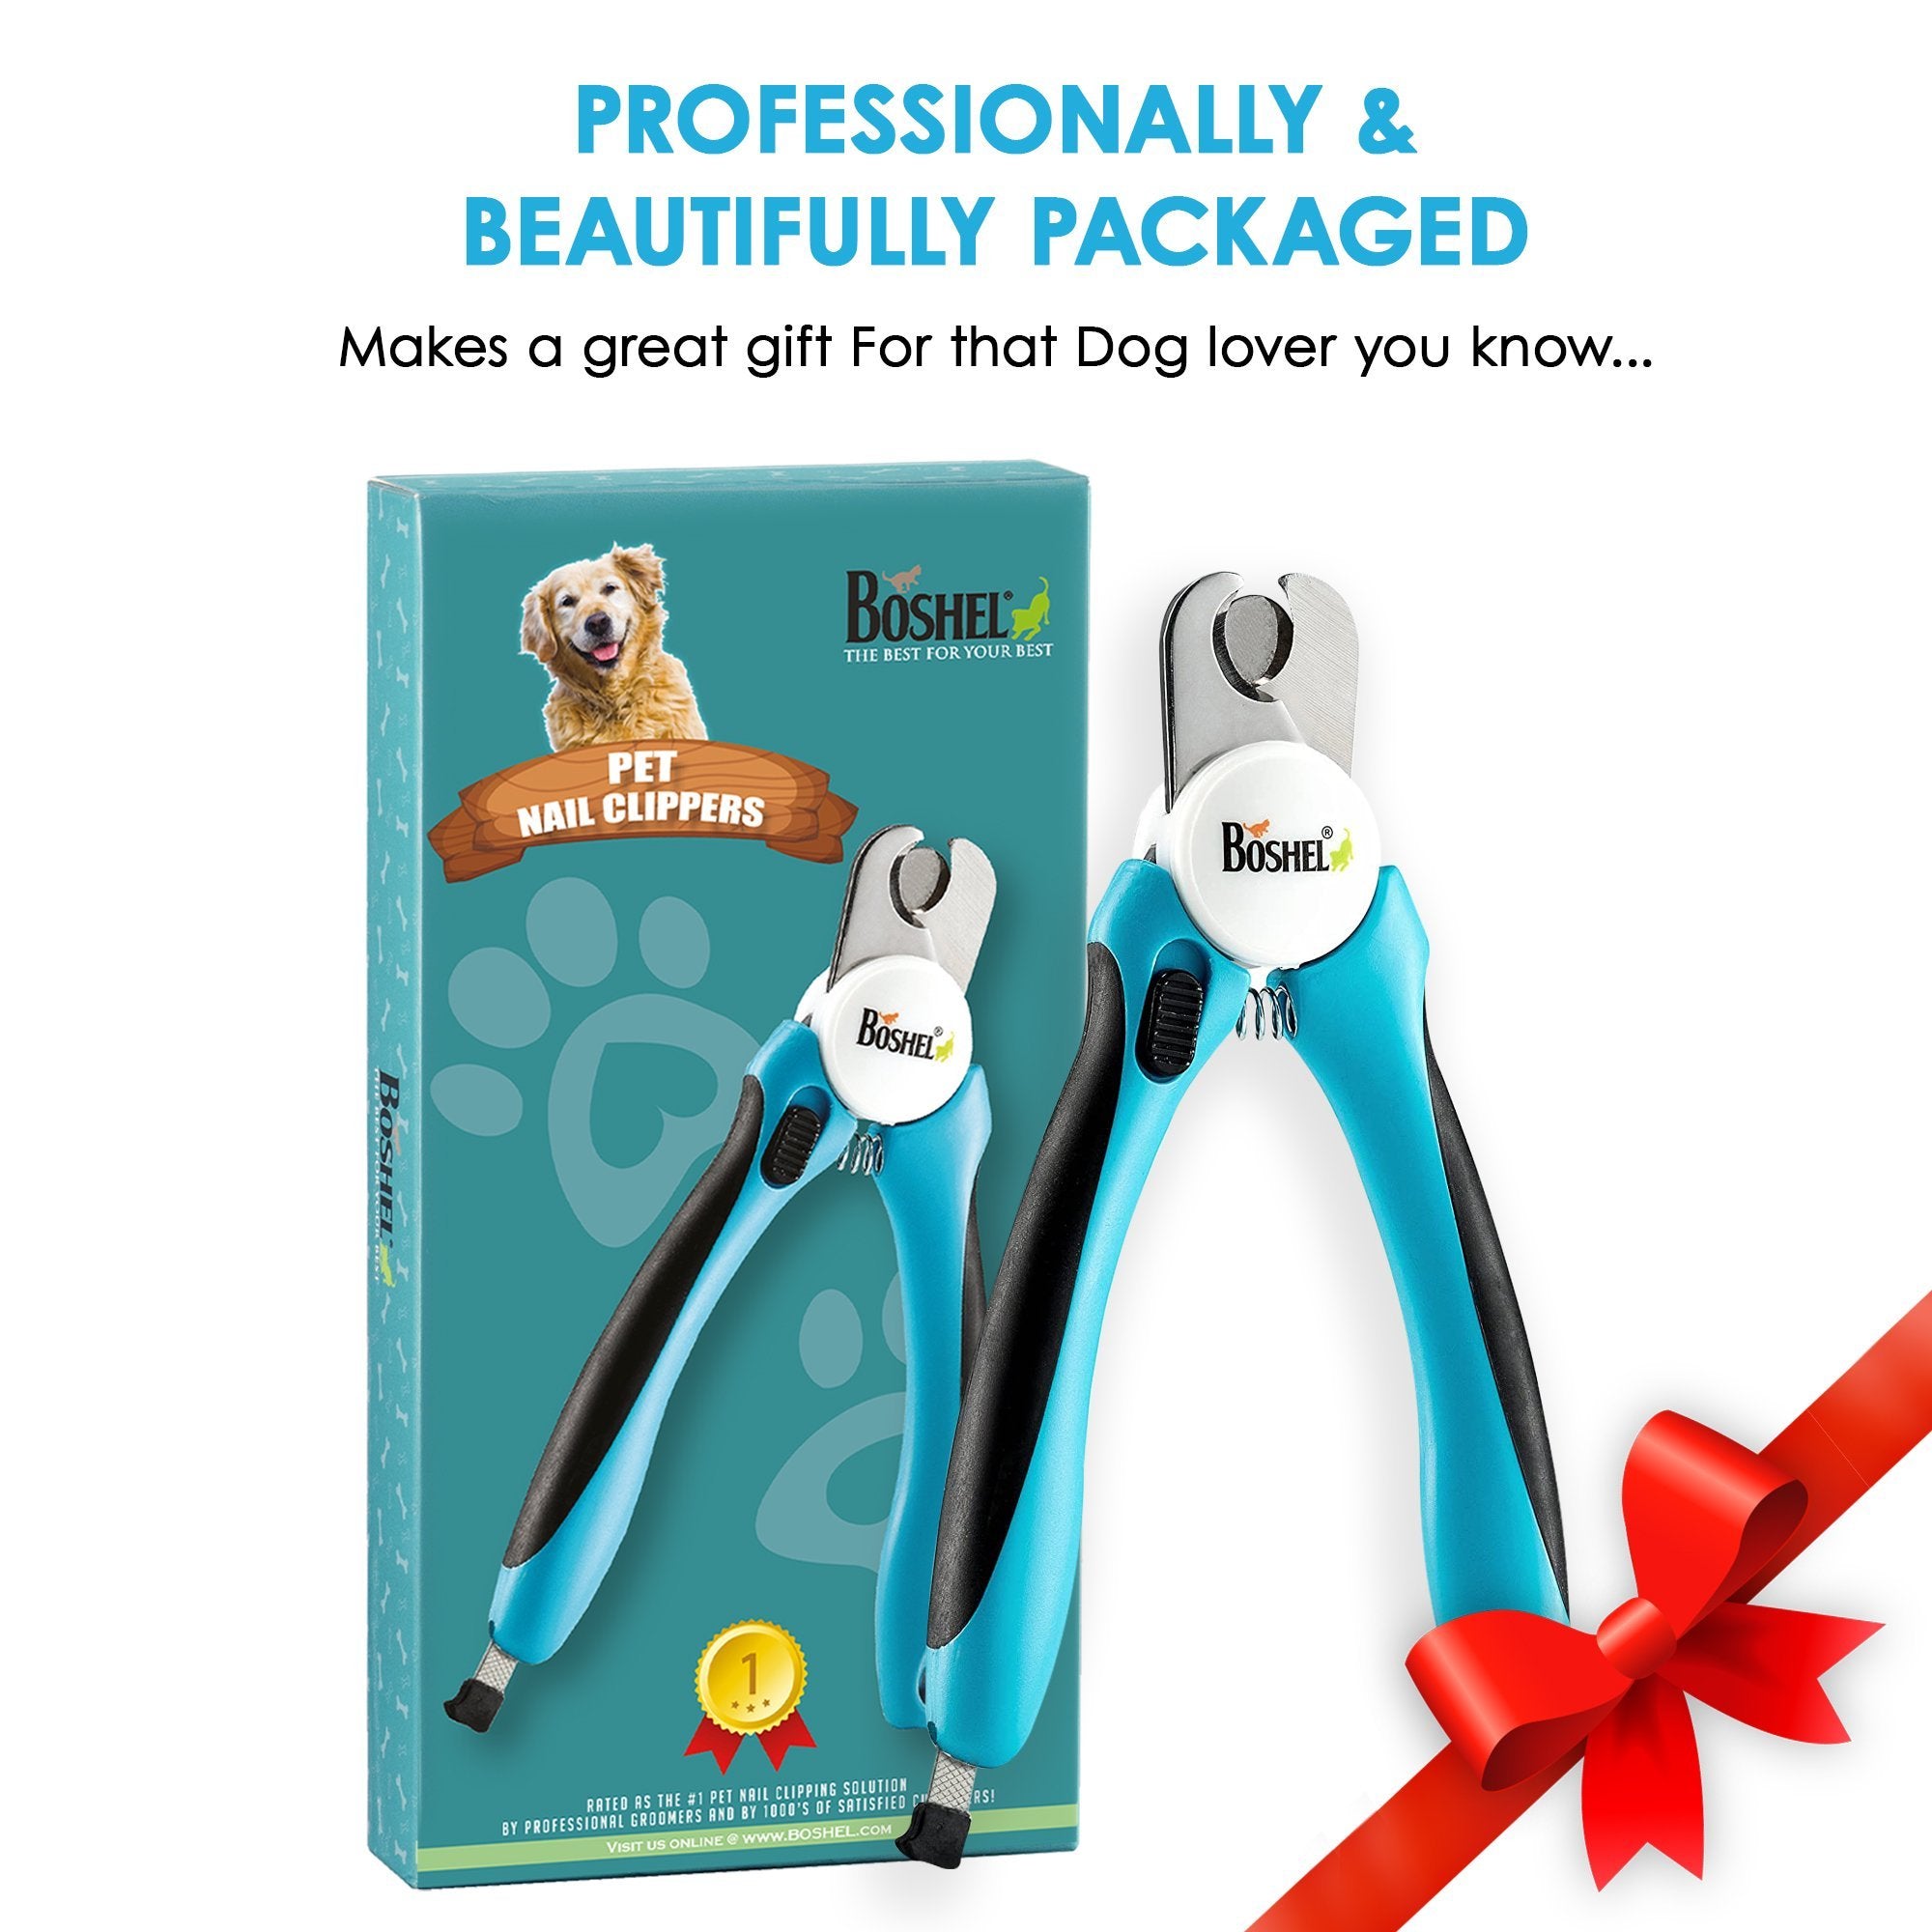 7 dog nail clippers to shop in 2023, according to experts